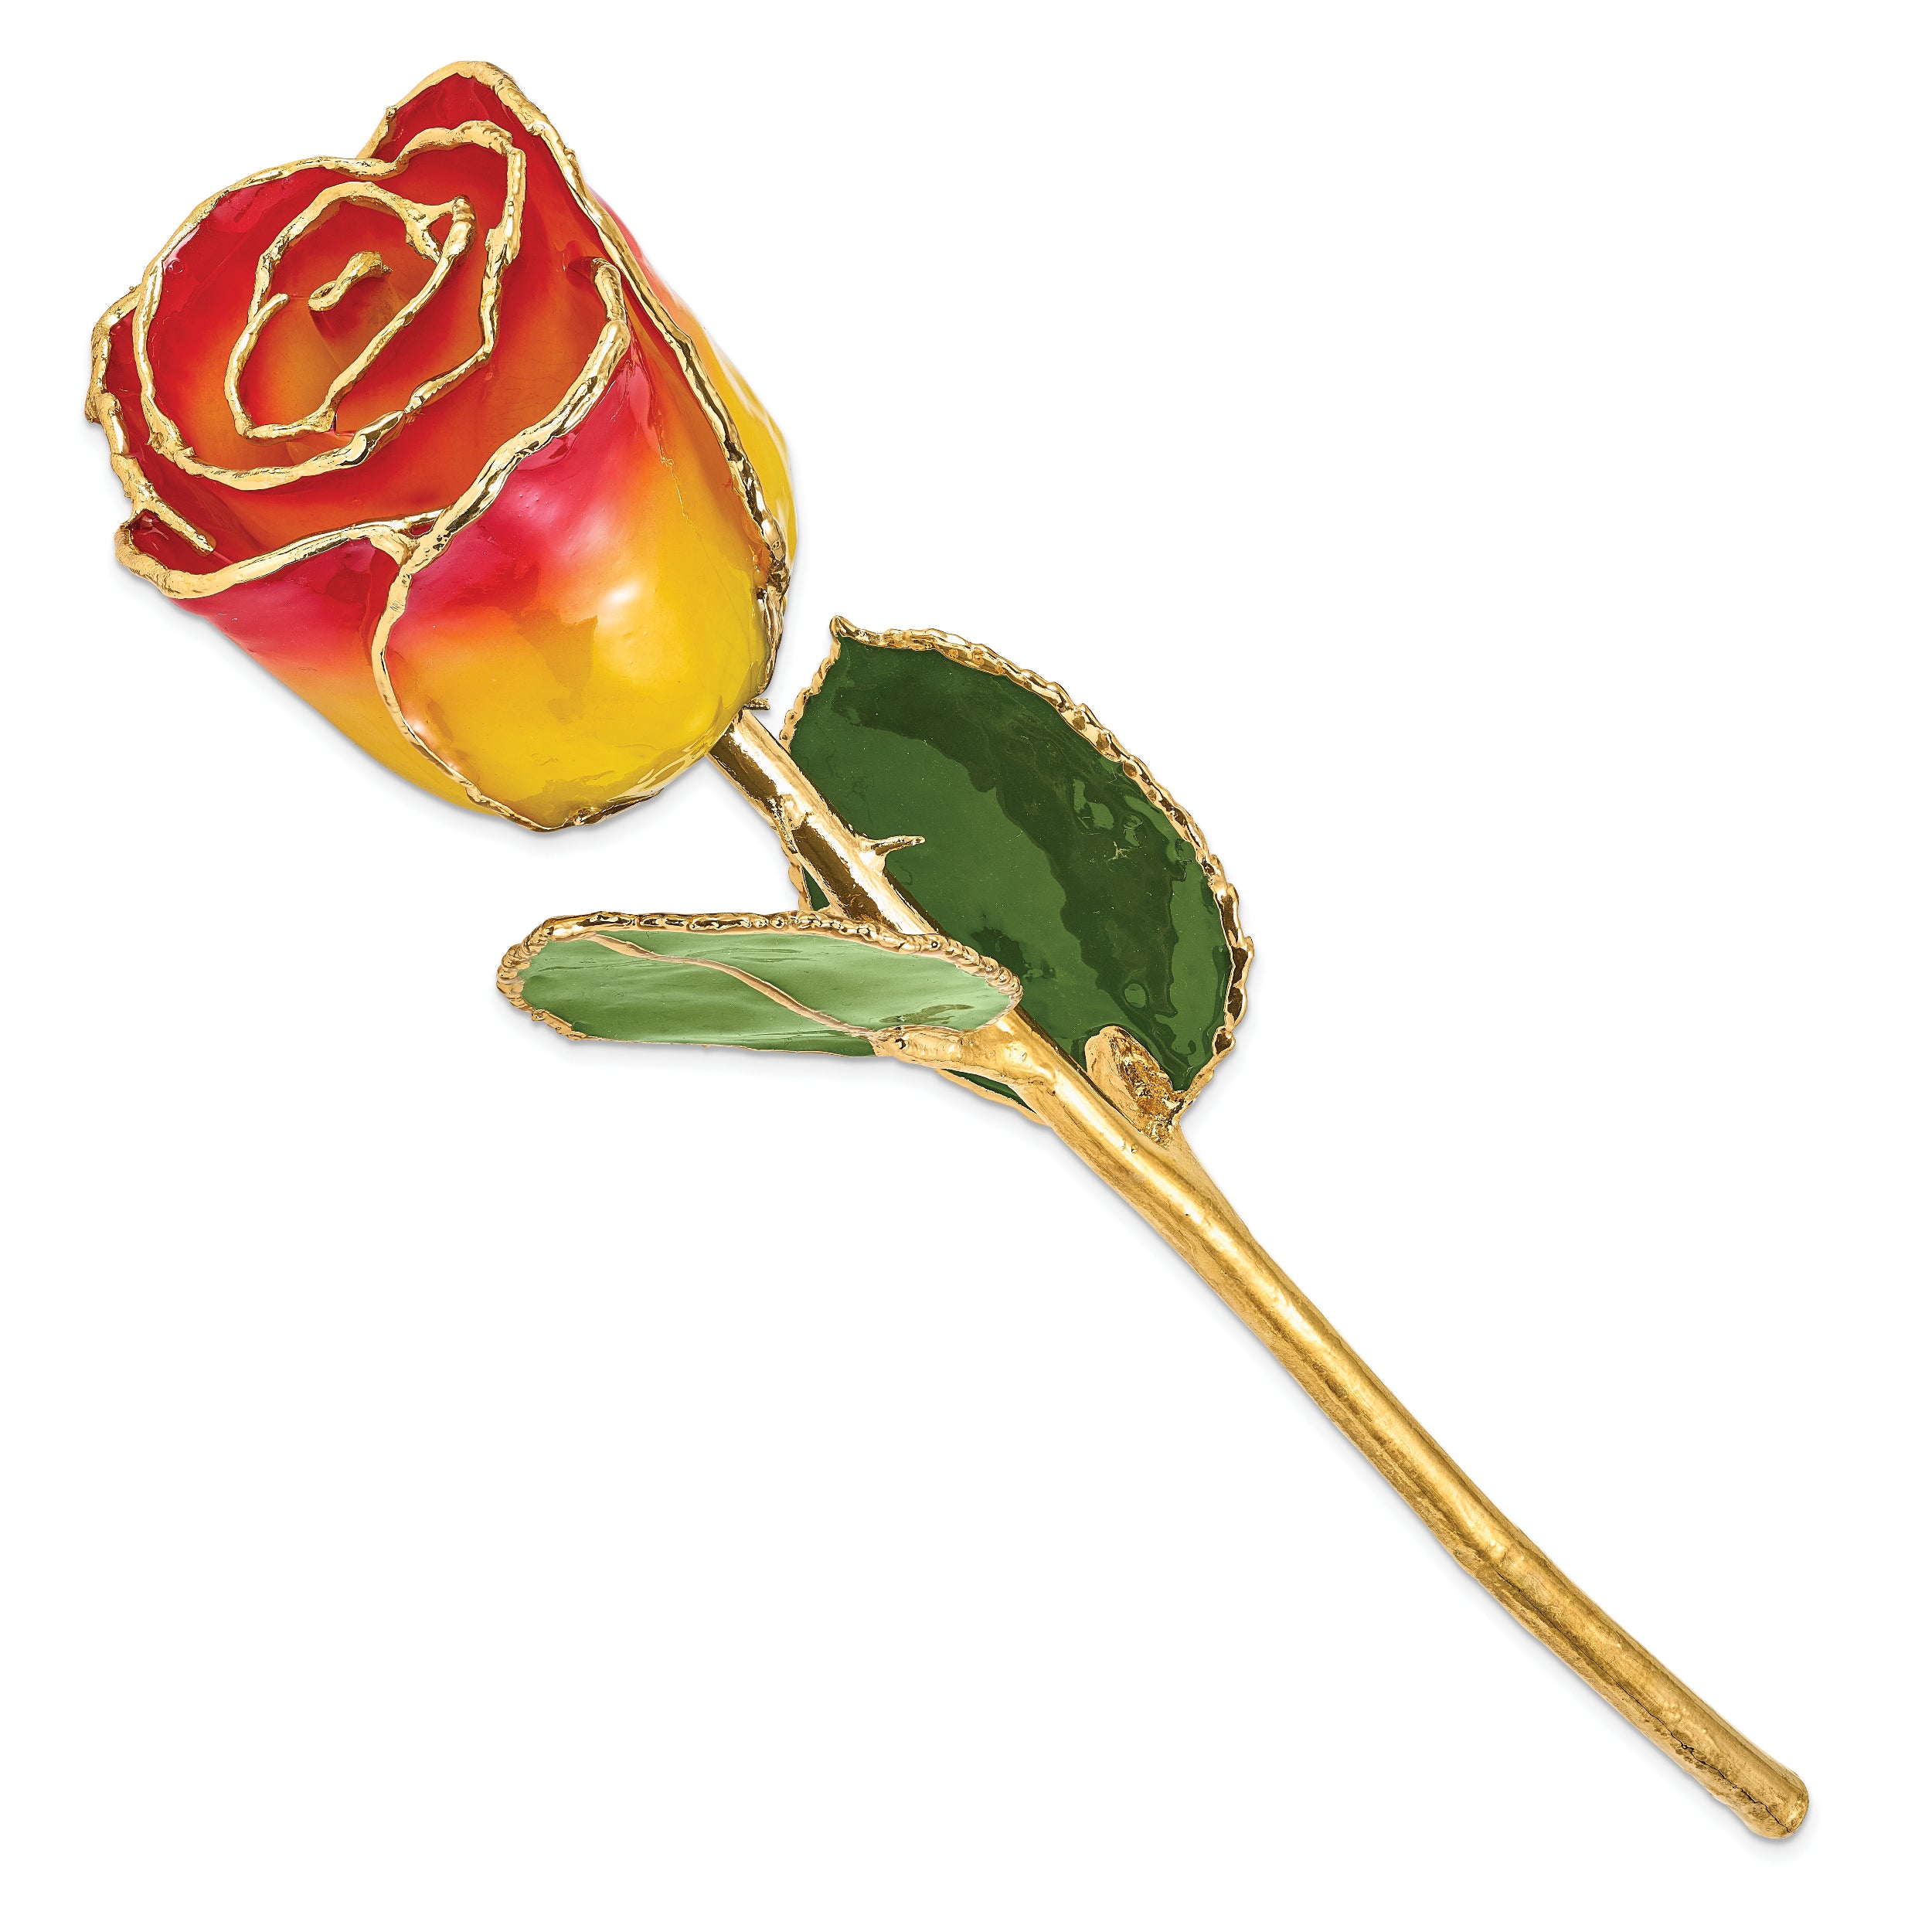 Lacquer Dipped Gold Trim Yellow/Red Rose